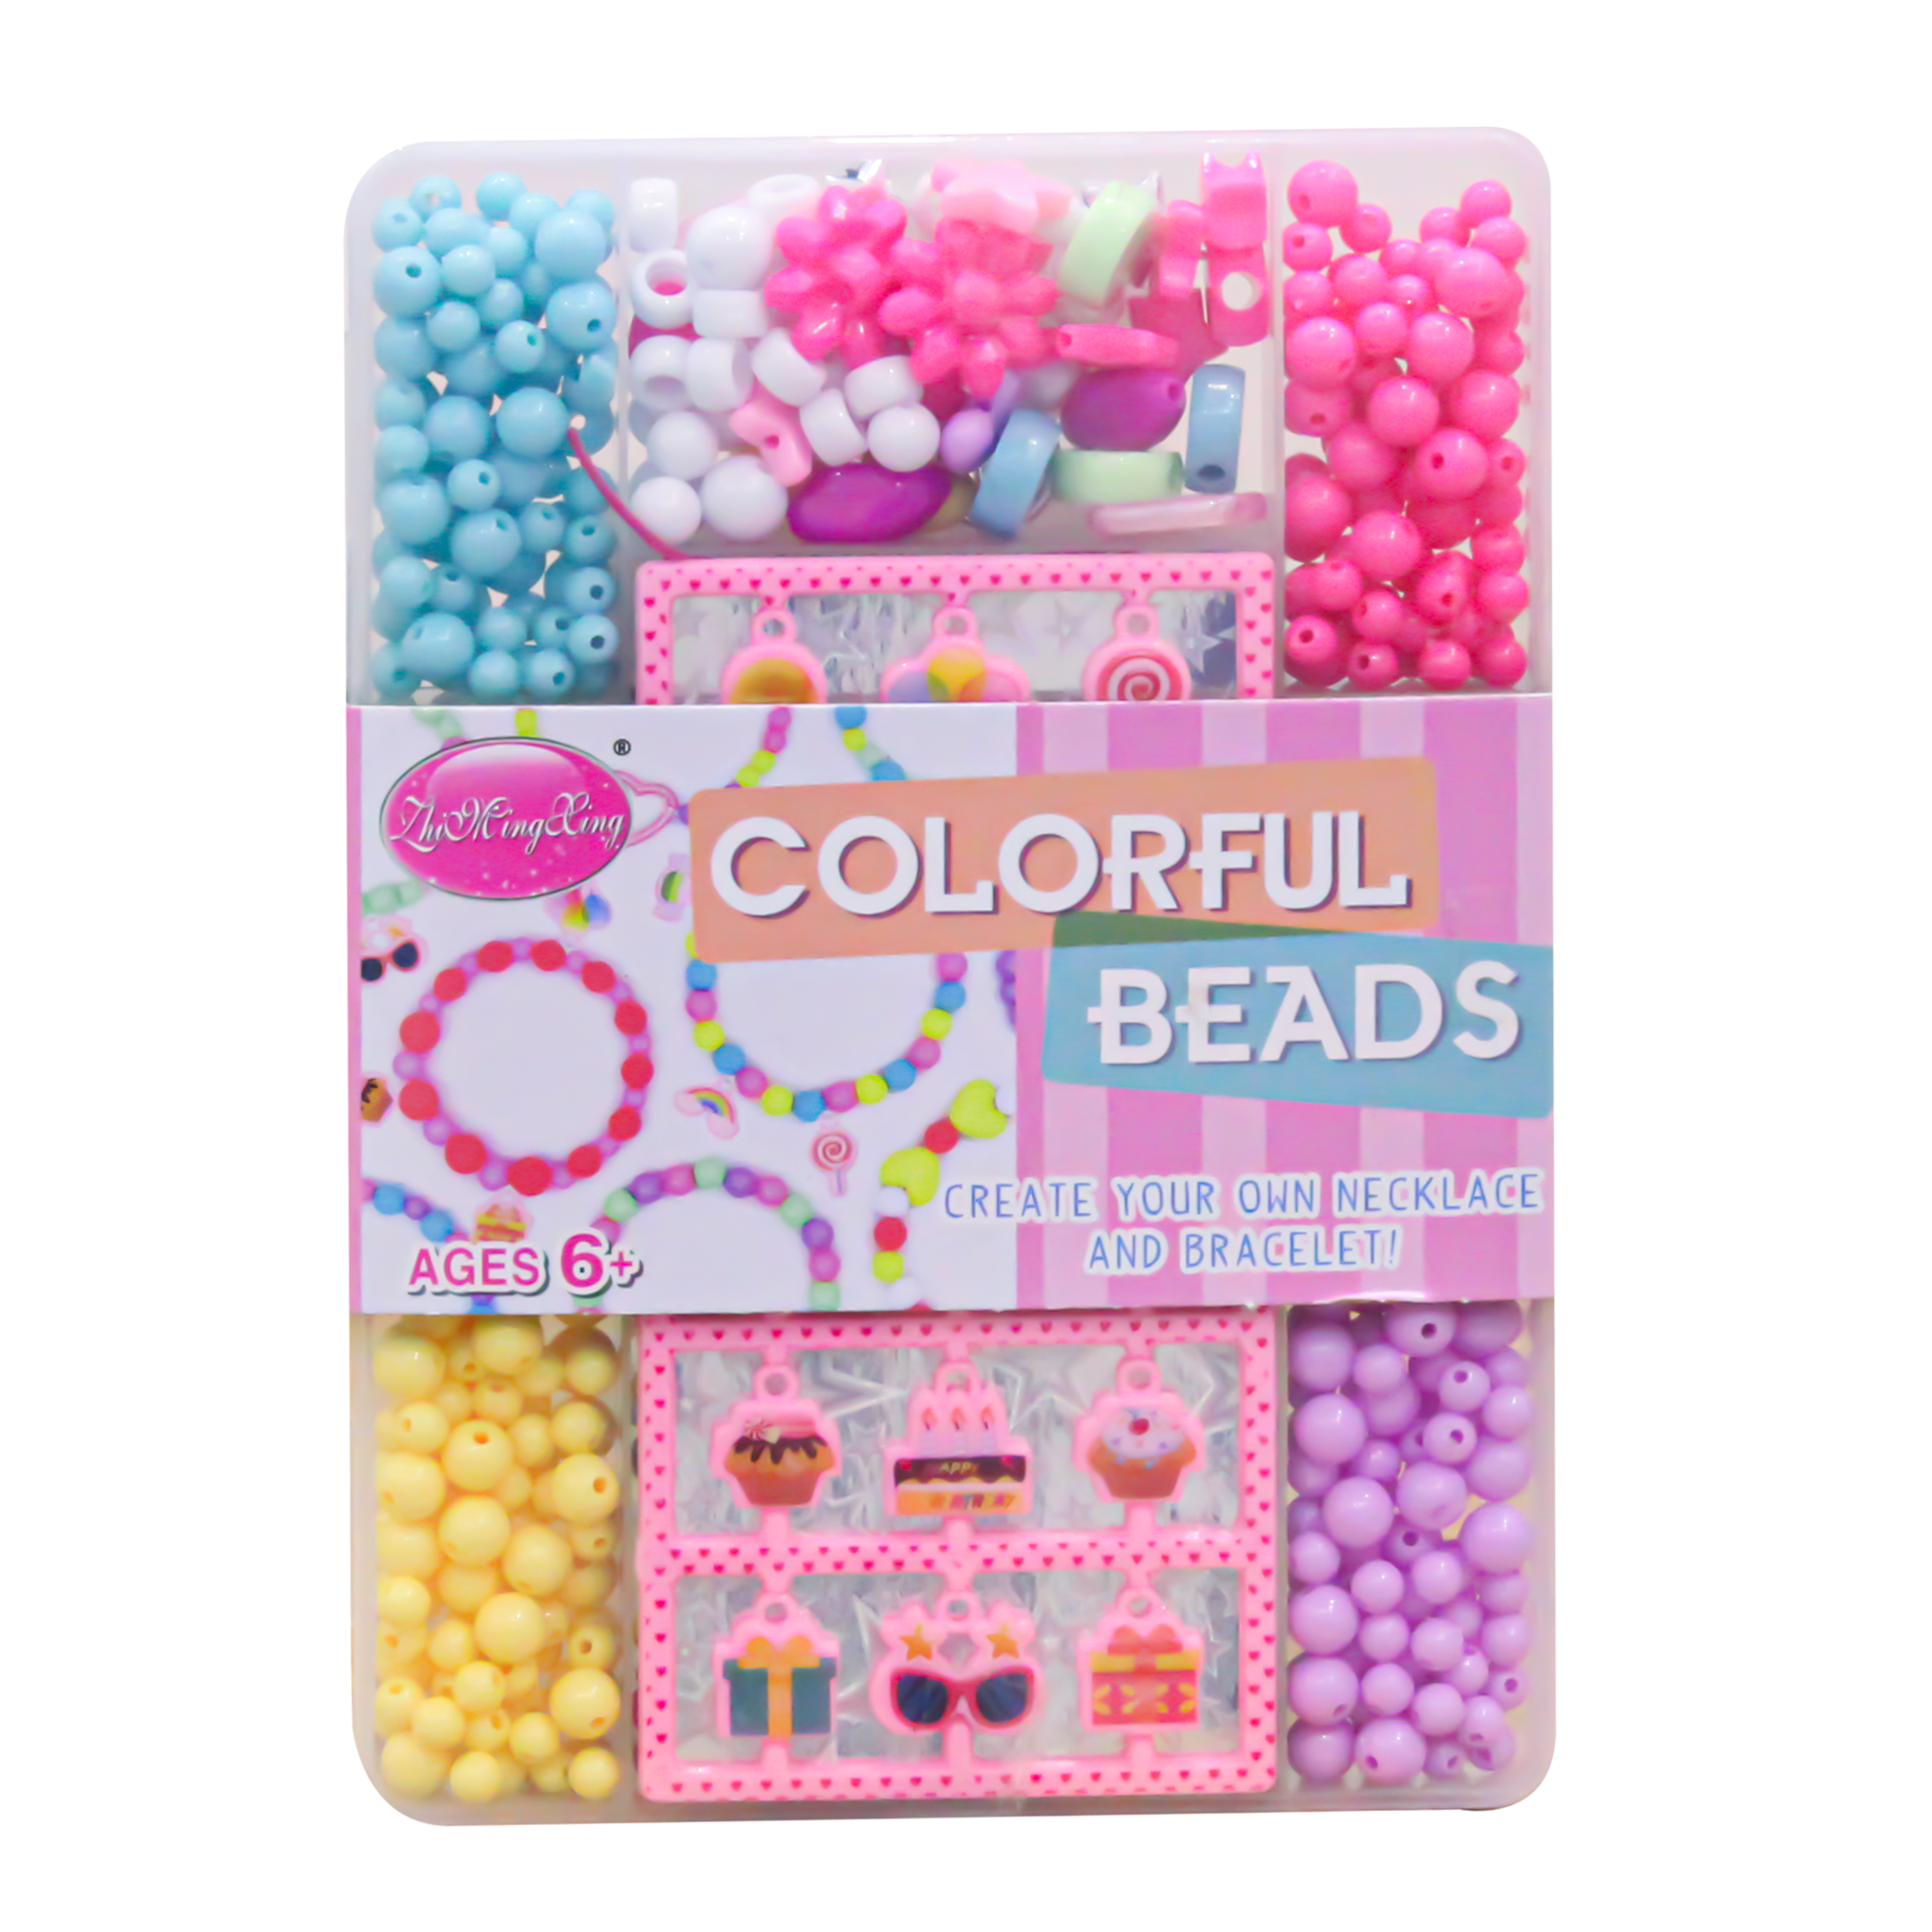 Colorful Beads to create your own Necklace and Bracelet! (Style may vary )